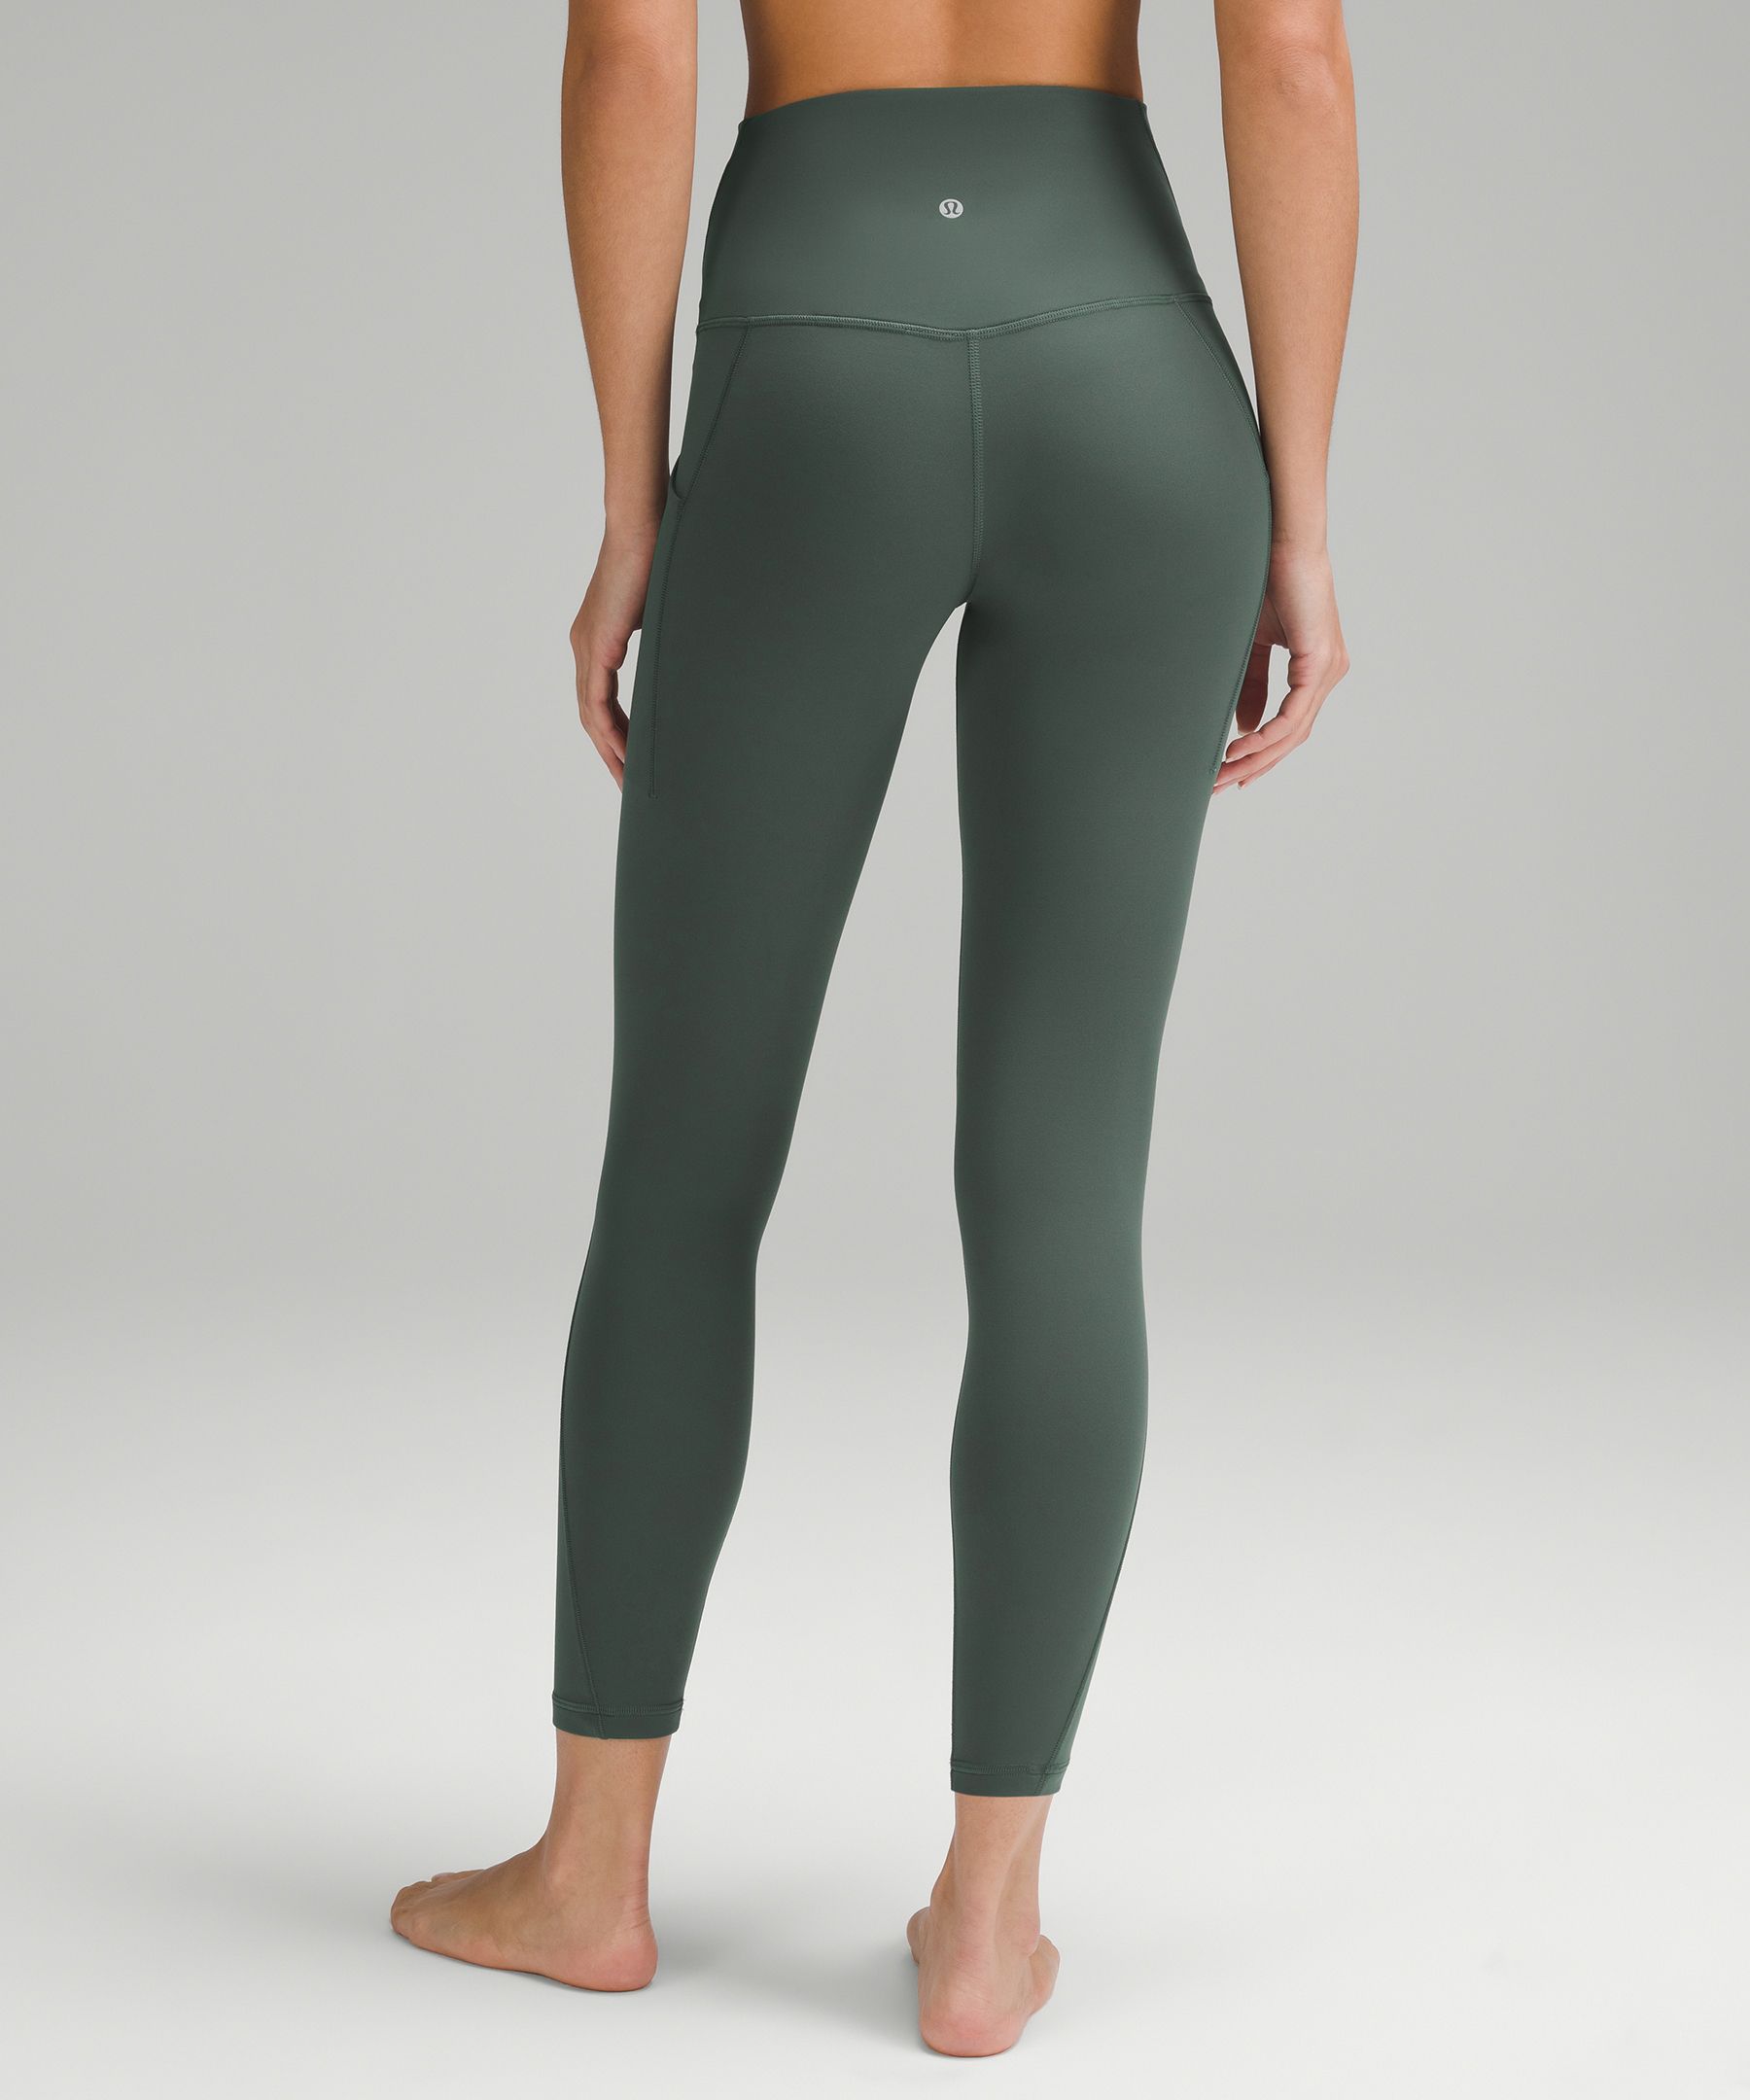 lululemon Align™ High-Rise Pant with Pockets 25, Women's Leggings/Tights